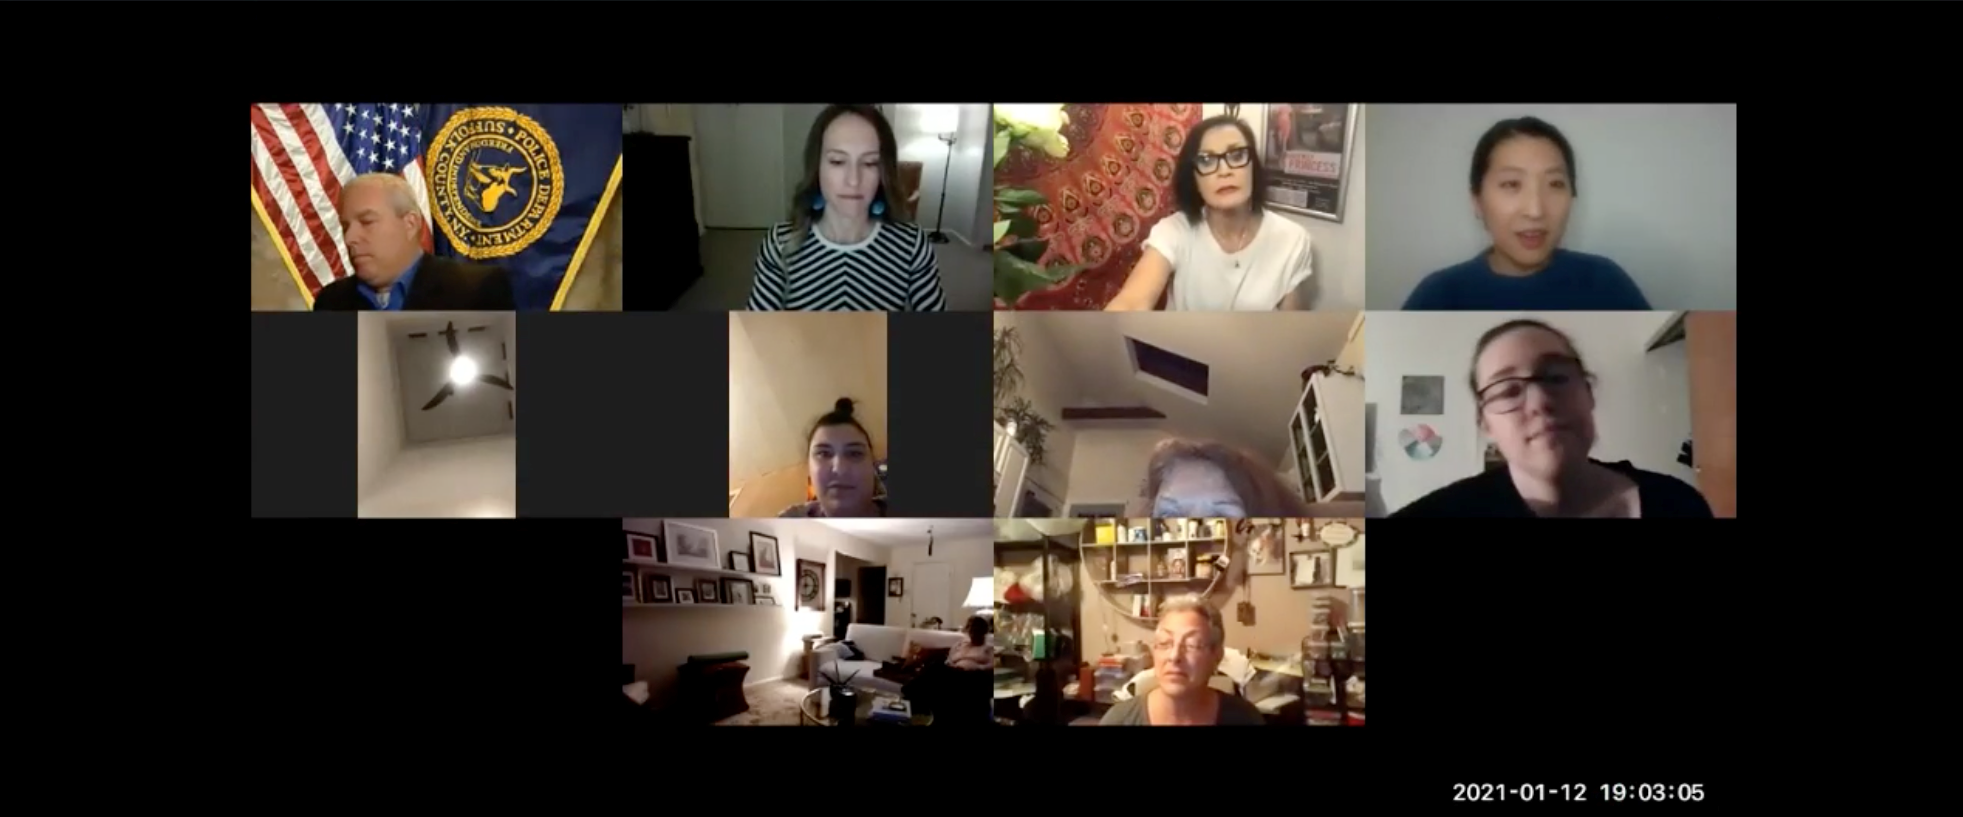 Screenshot from a Zoom discussion on Human Trafficking